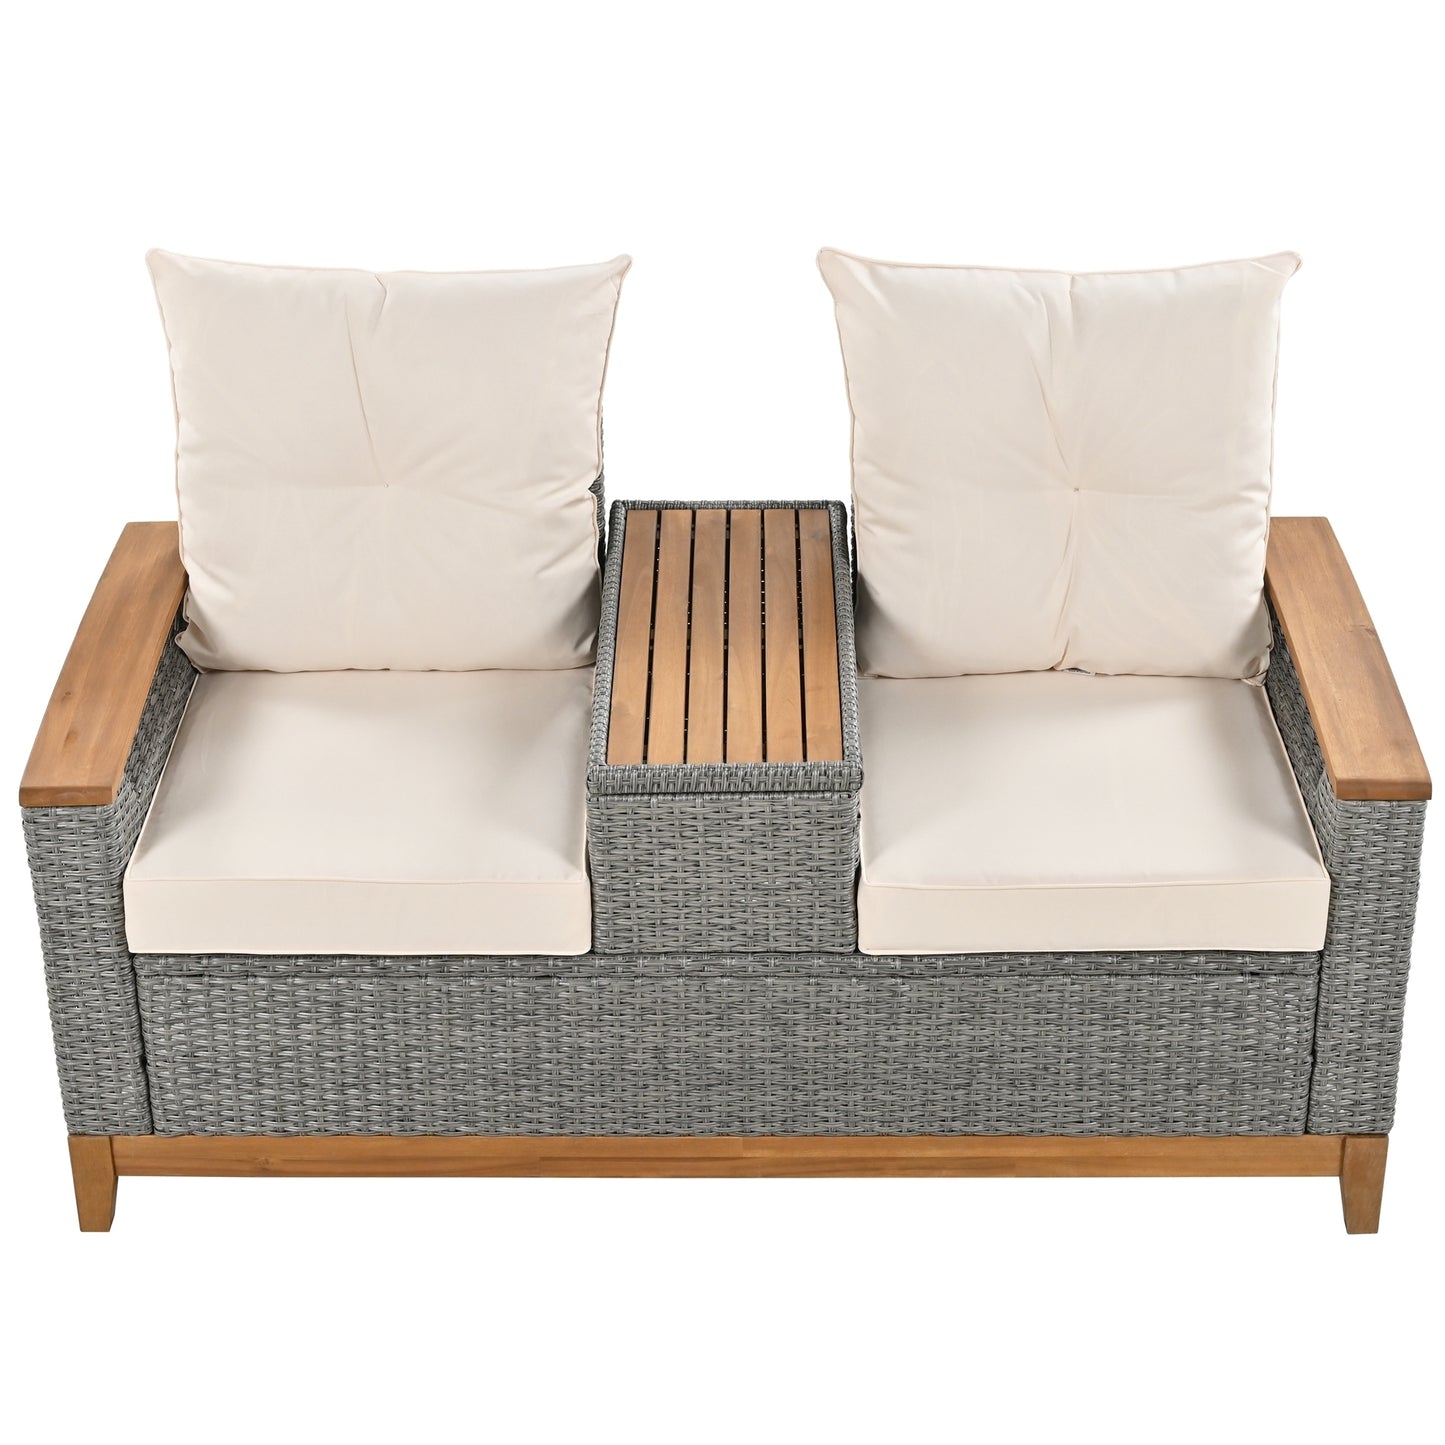 Outdoor Comfort Adjustable Loveseat, Armrest With Storage Space With 2 Colors, Suitable For Courtyards, Swimming Pools And Balconies, etc.